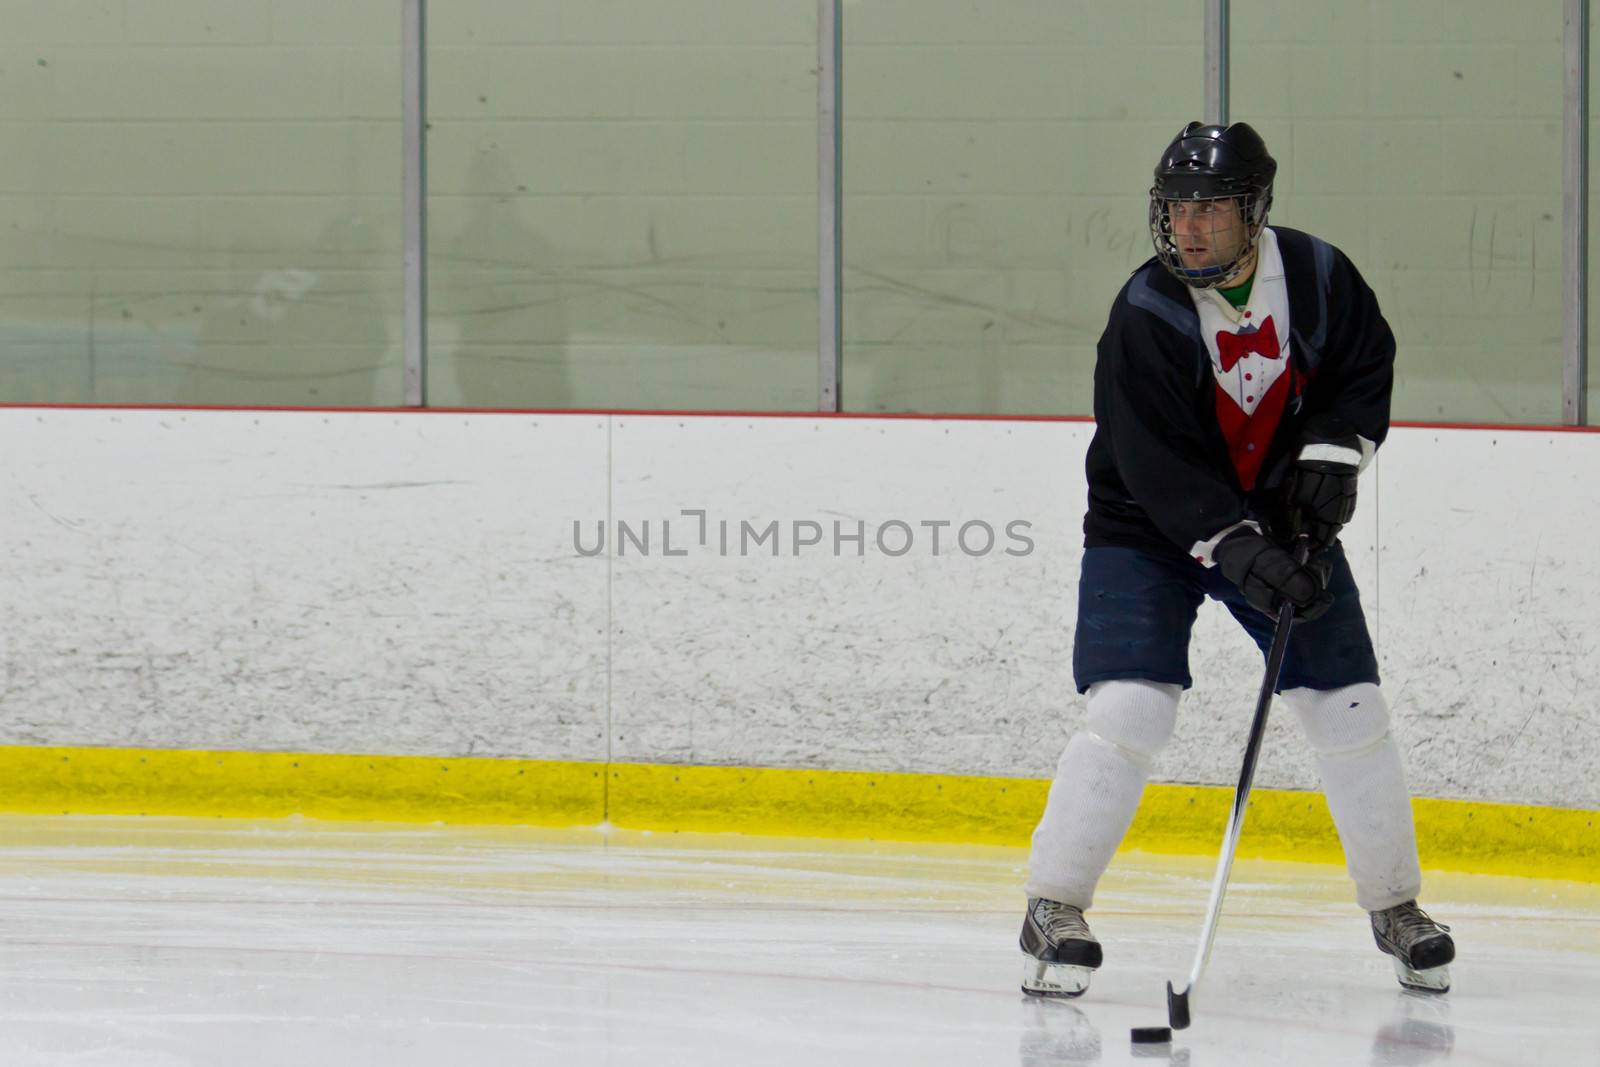 Hockey player during a game